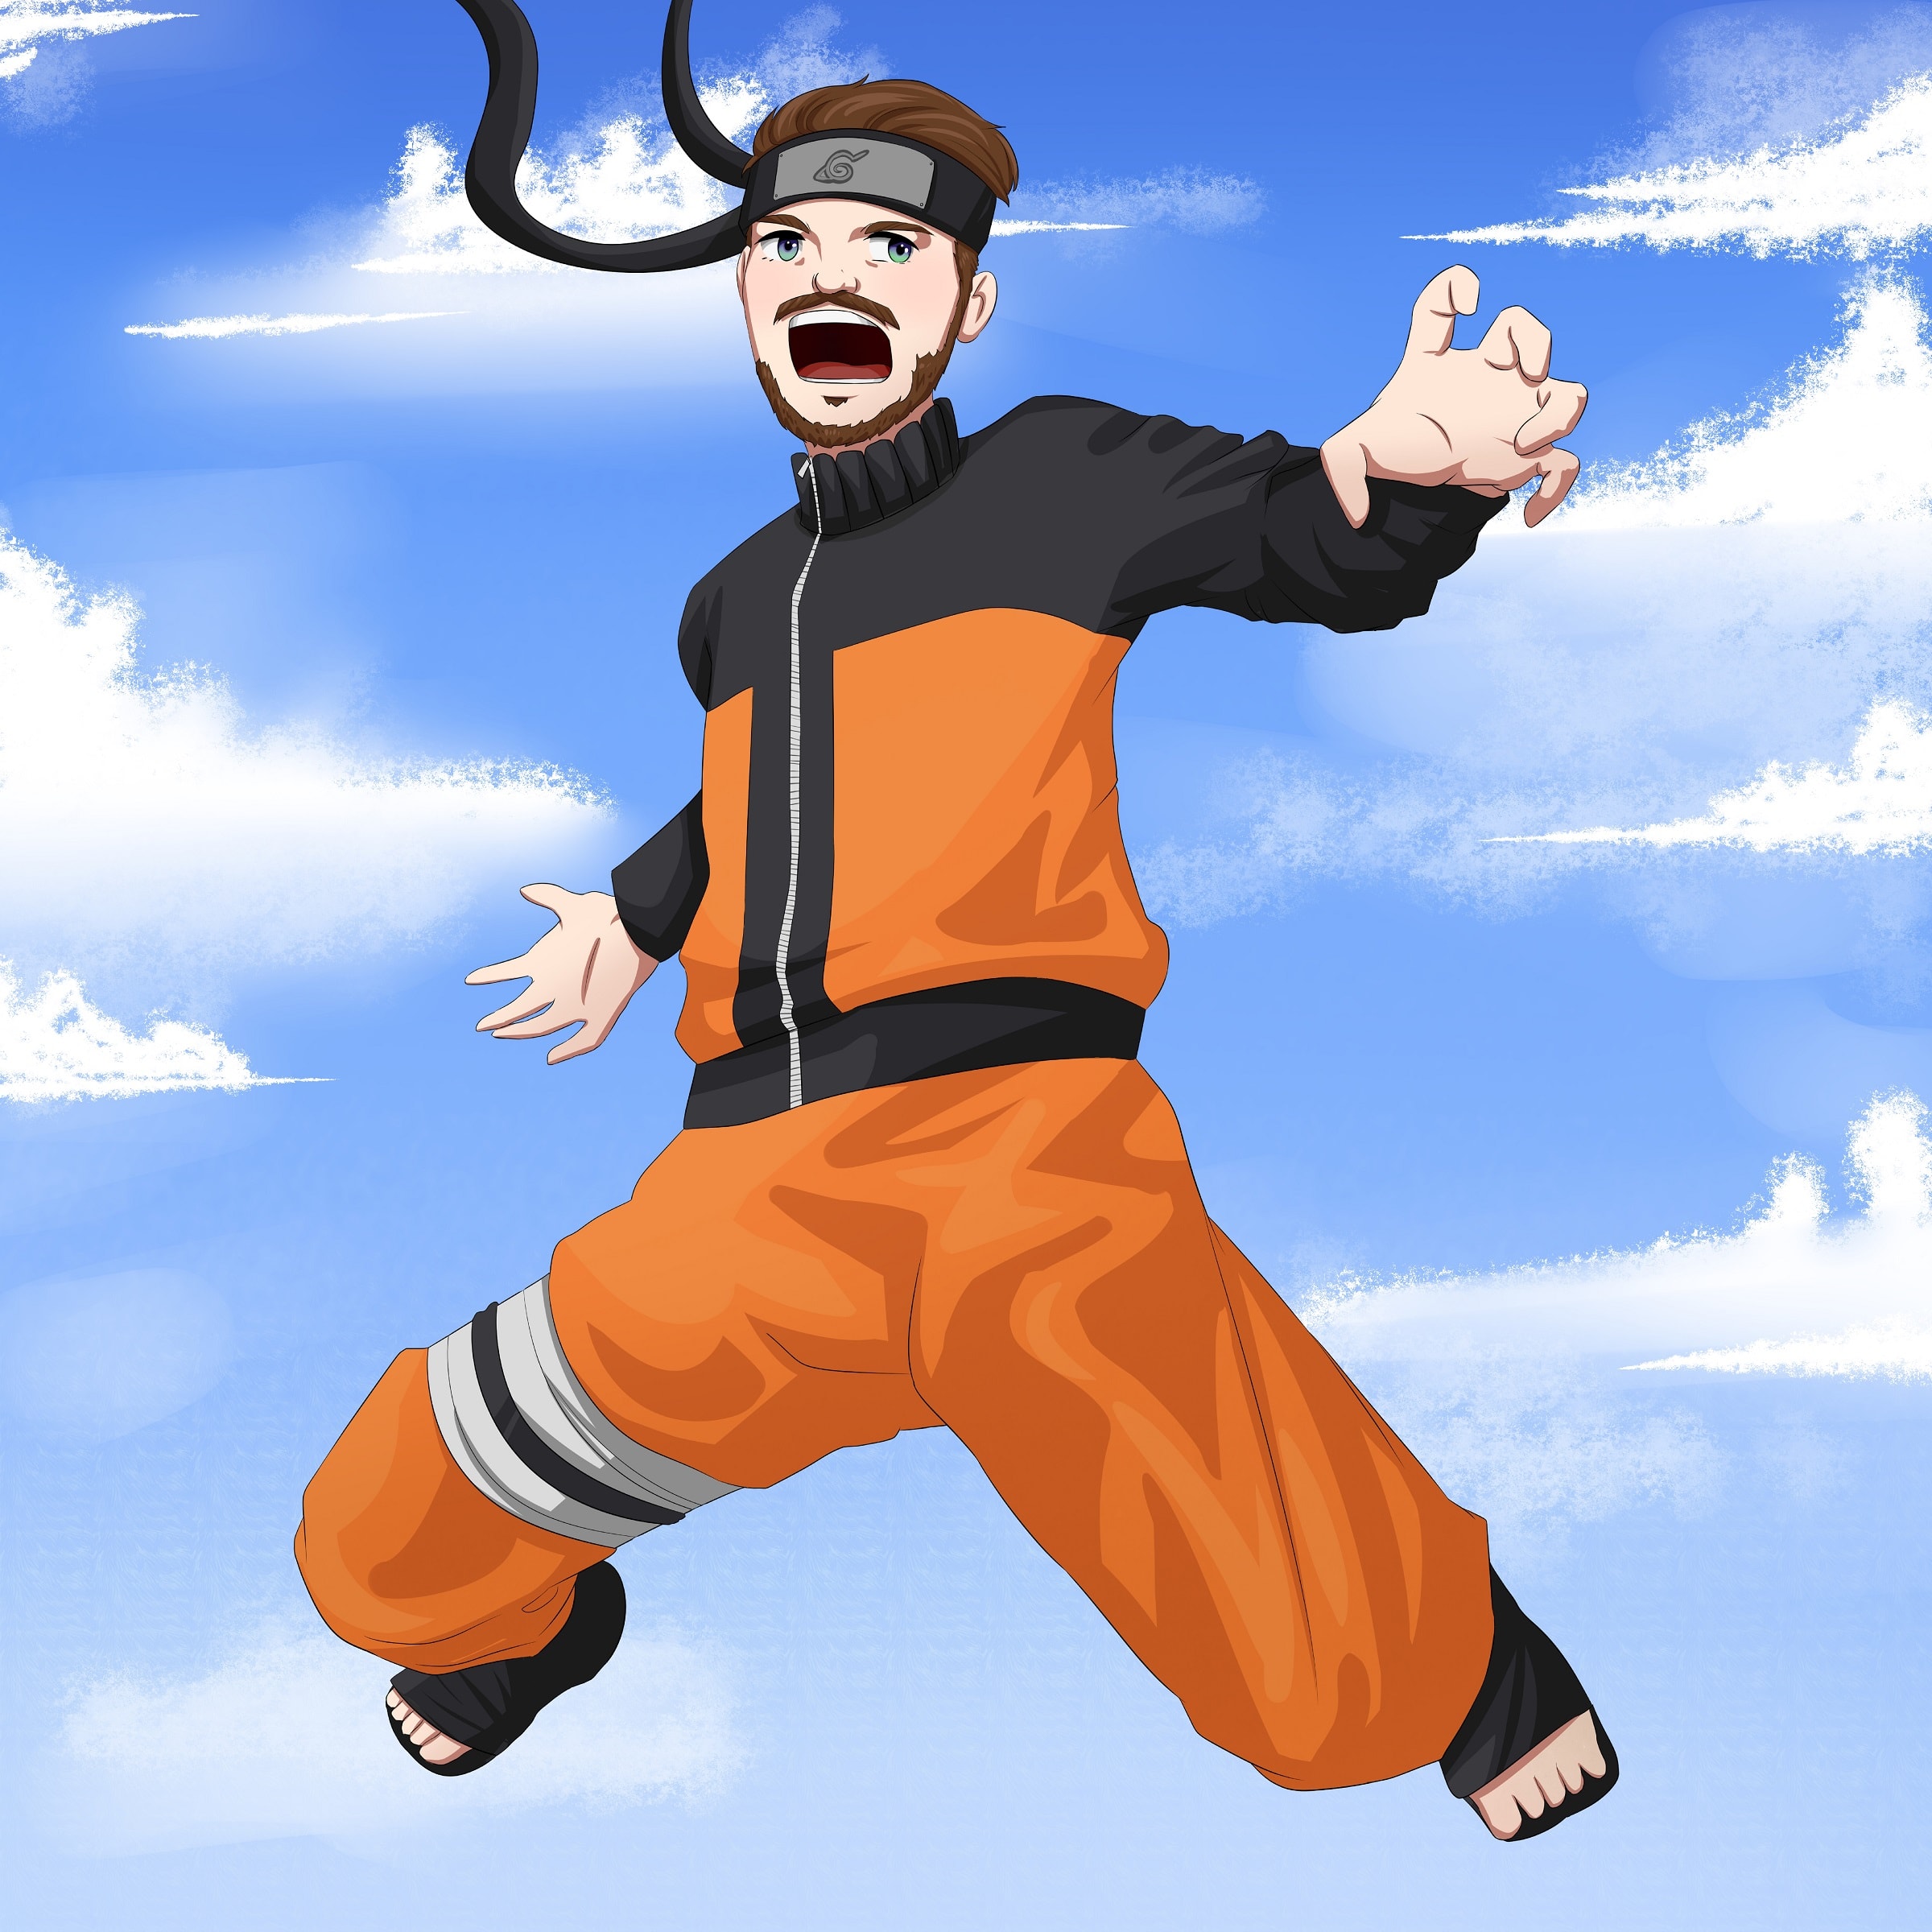 draw you in naruto anime style